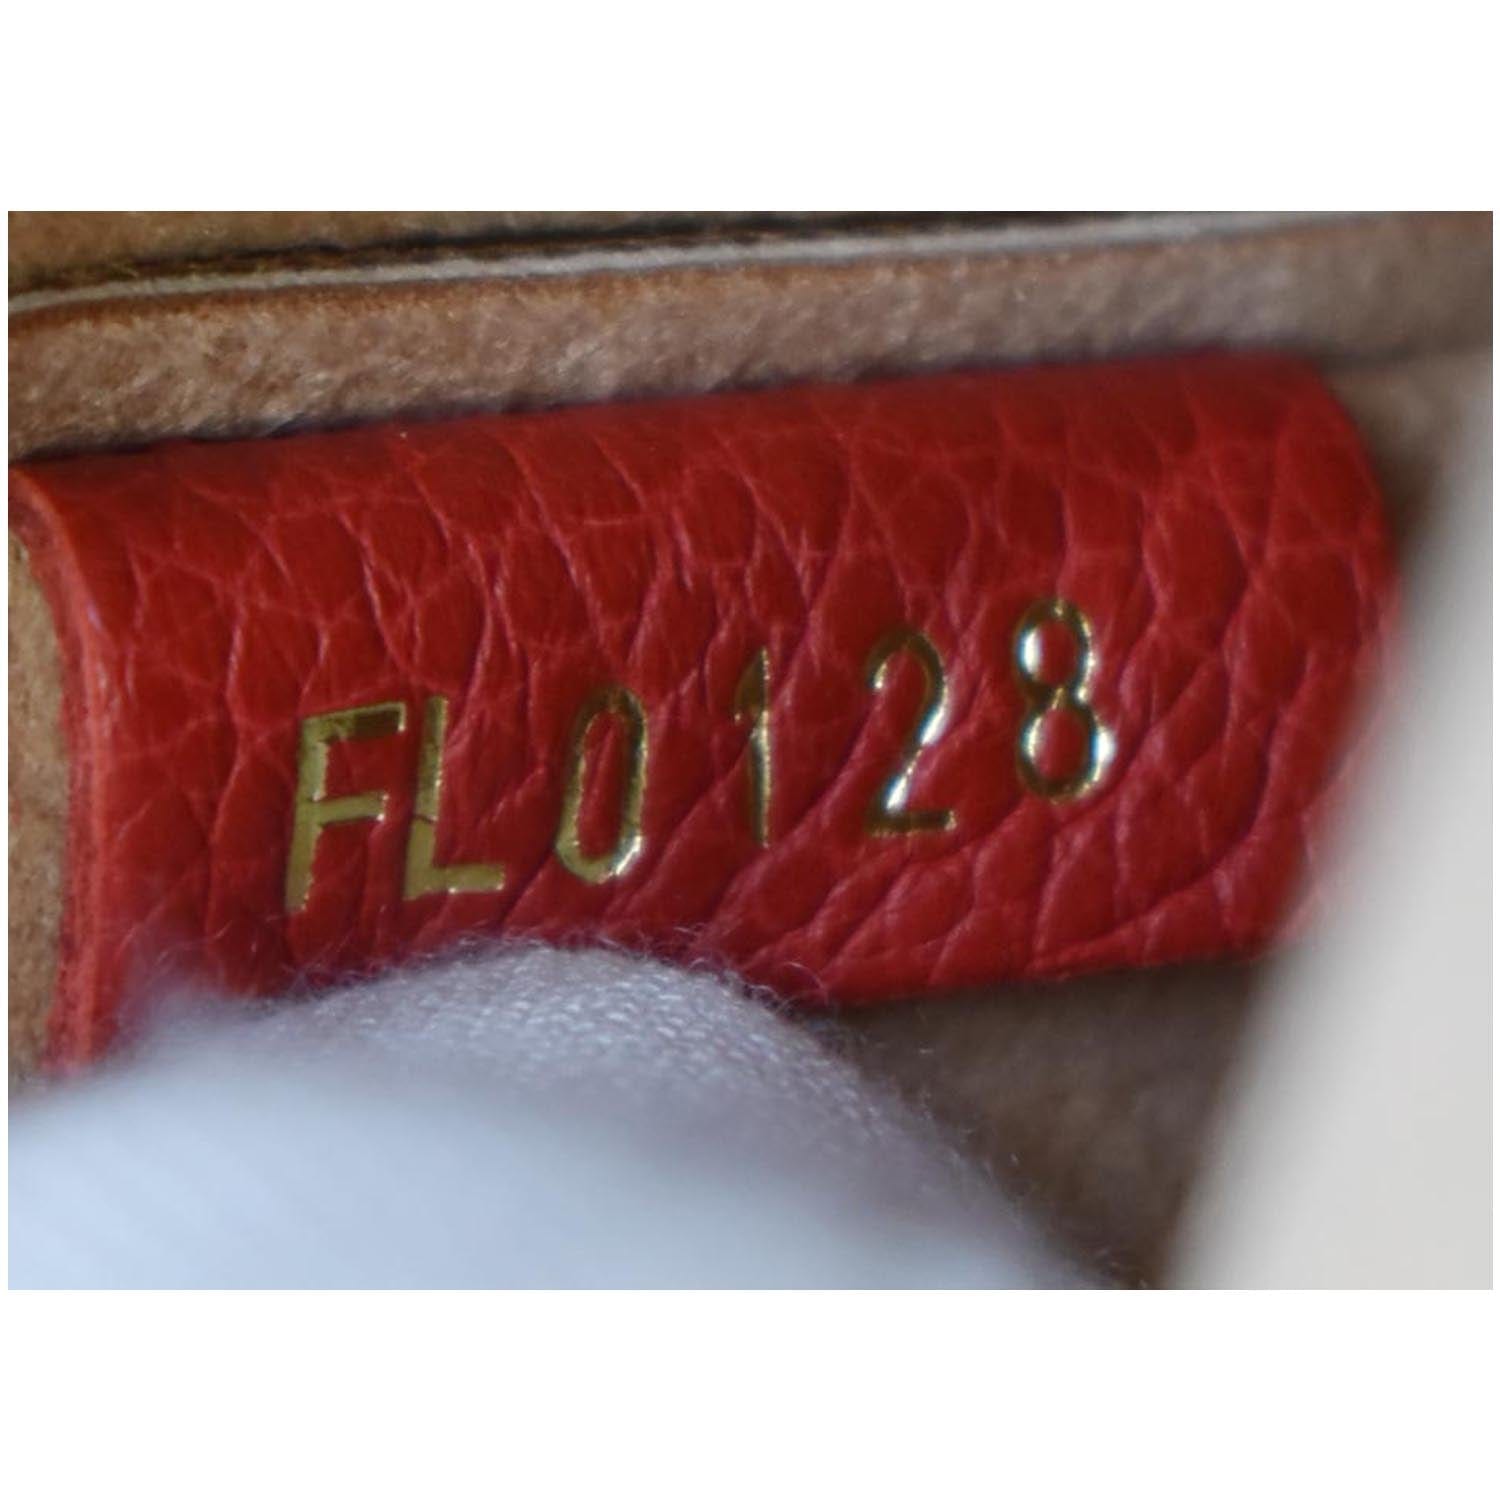 Louis Vuitton Monogram Flandrin two way bag red handles and trim